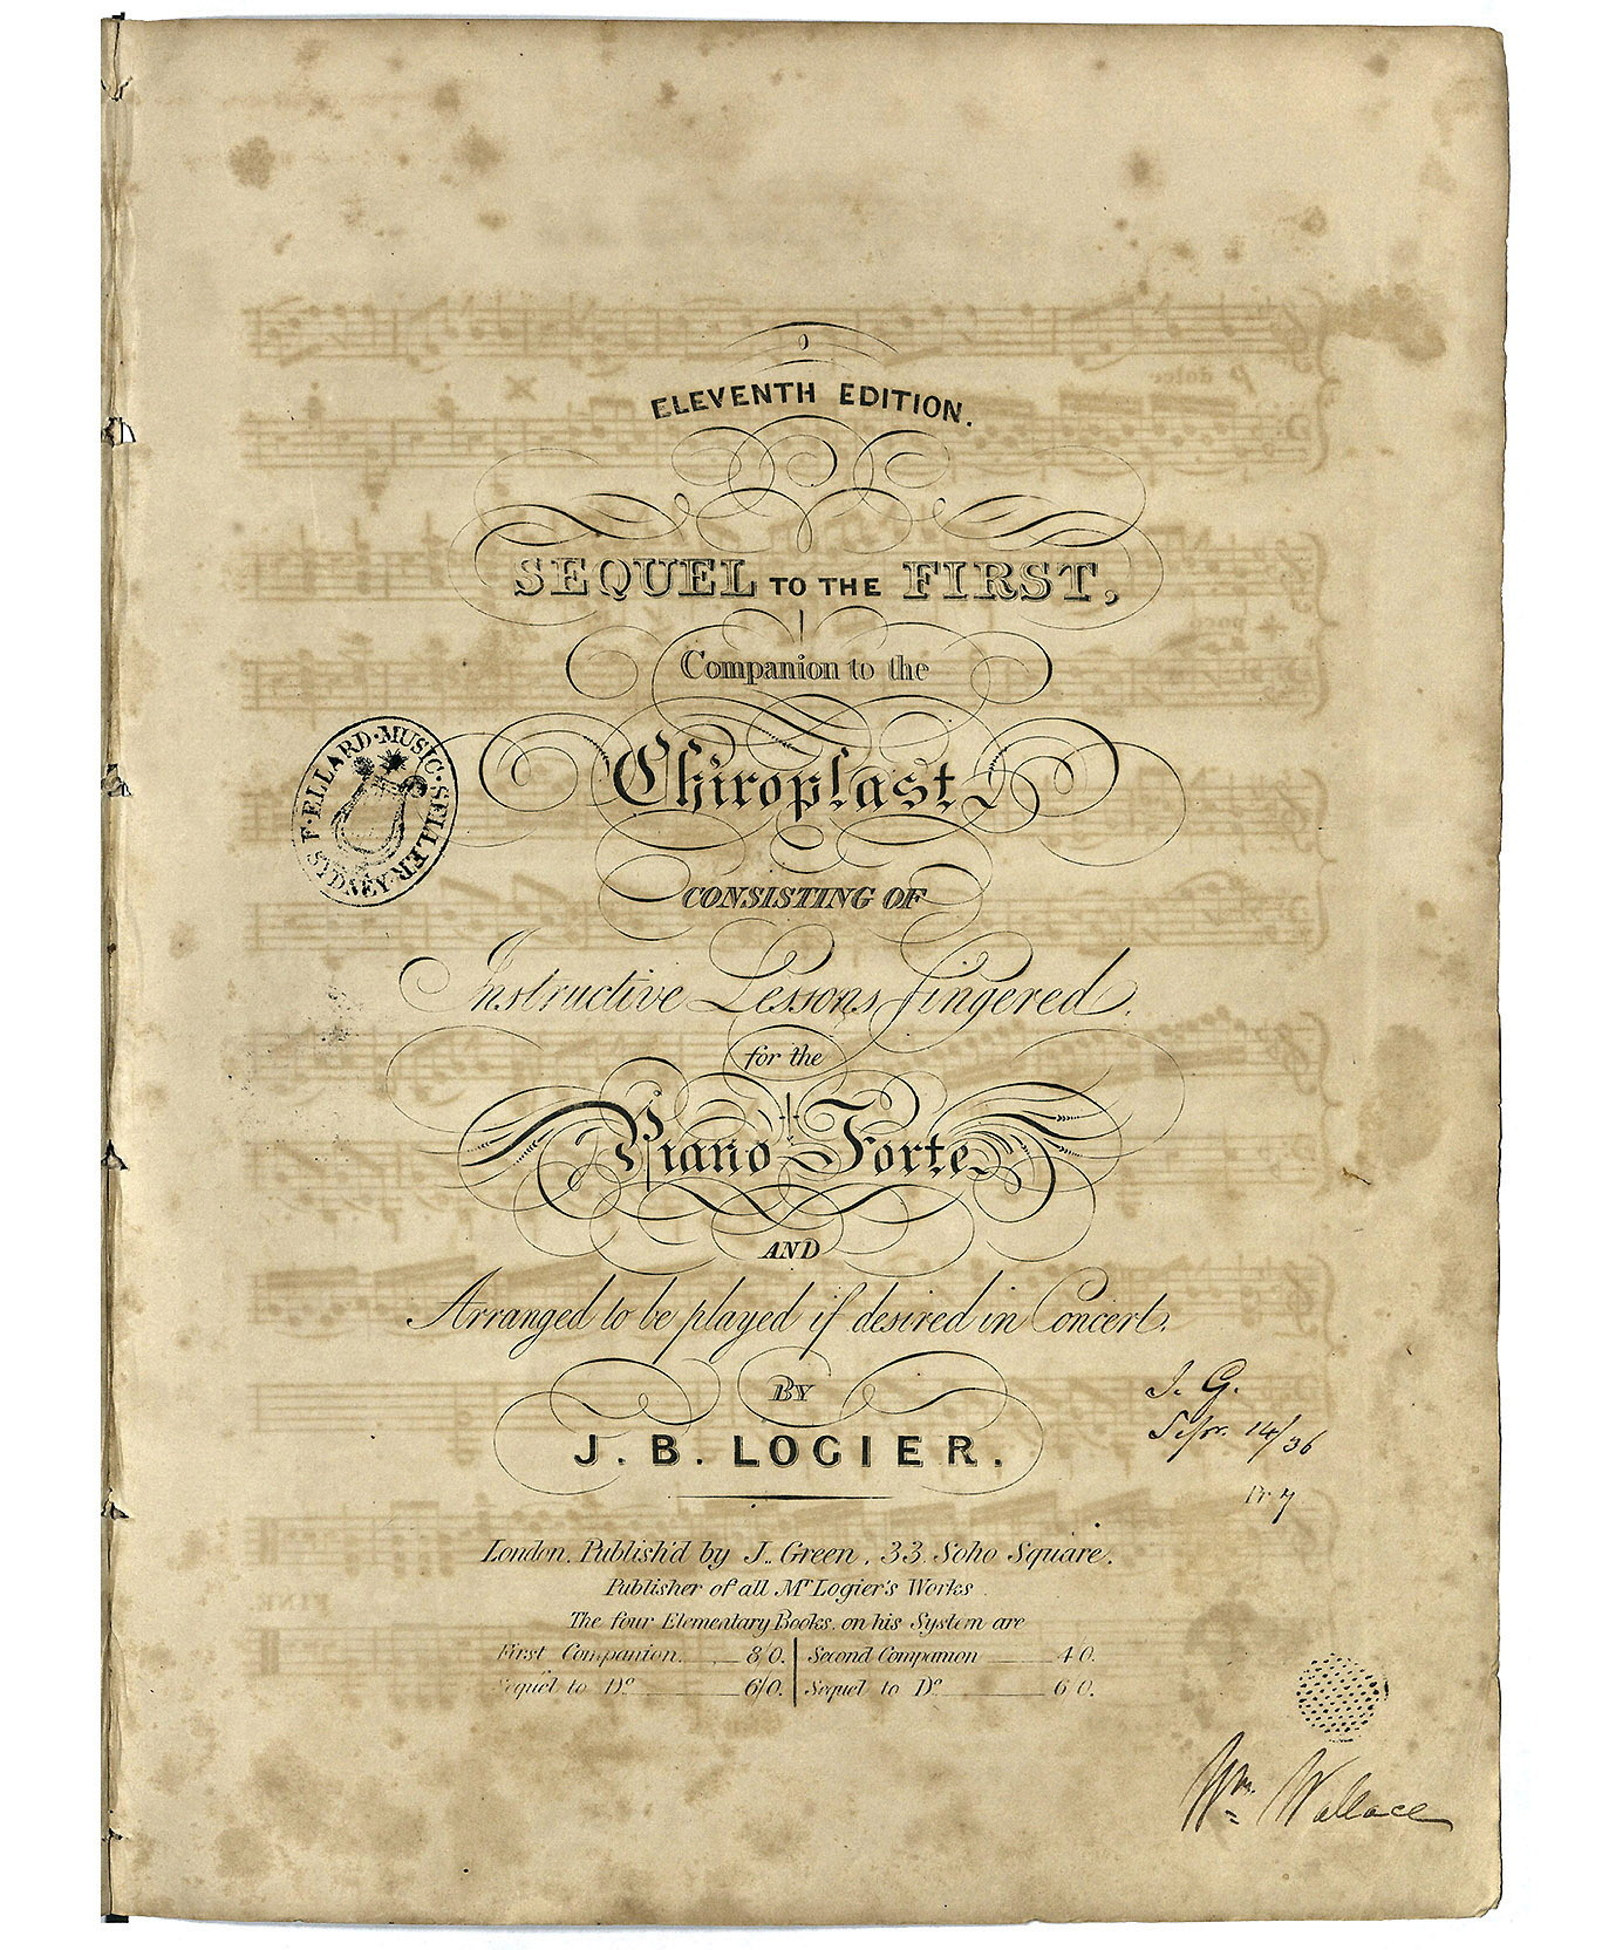 Miss Pye's music book, item 13: Sequel to the first companion to the chiroplast, consisting of instructive lessons fingered for the piano forte and arranged to be played if desired in concerts, by J. B. Logier, eleventh edition